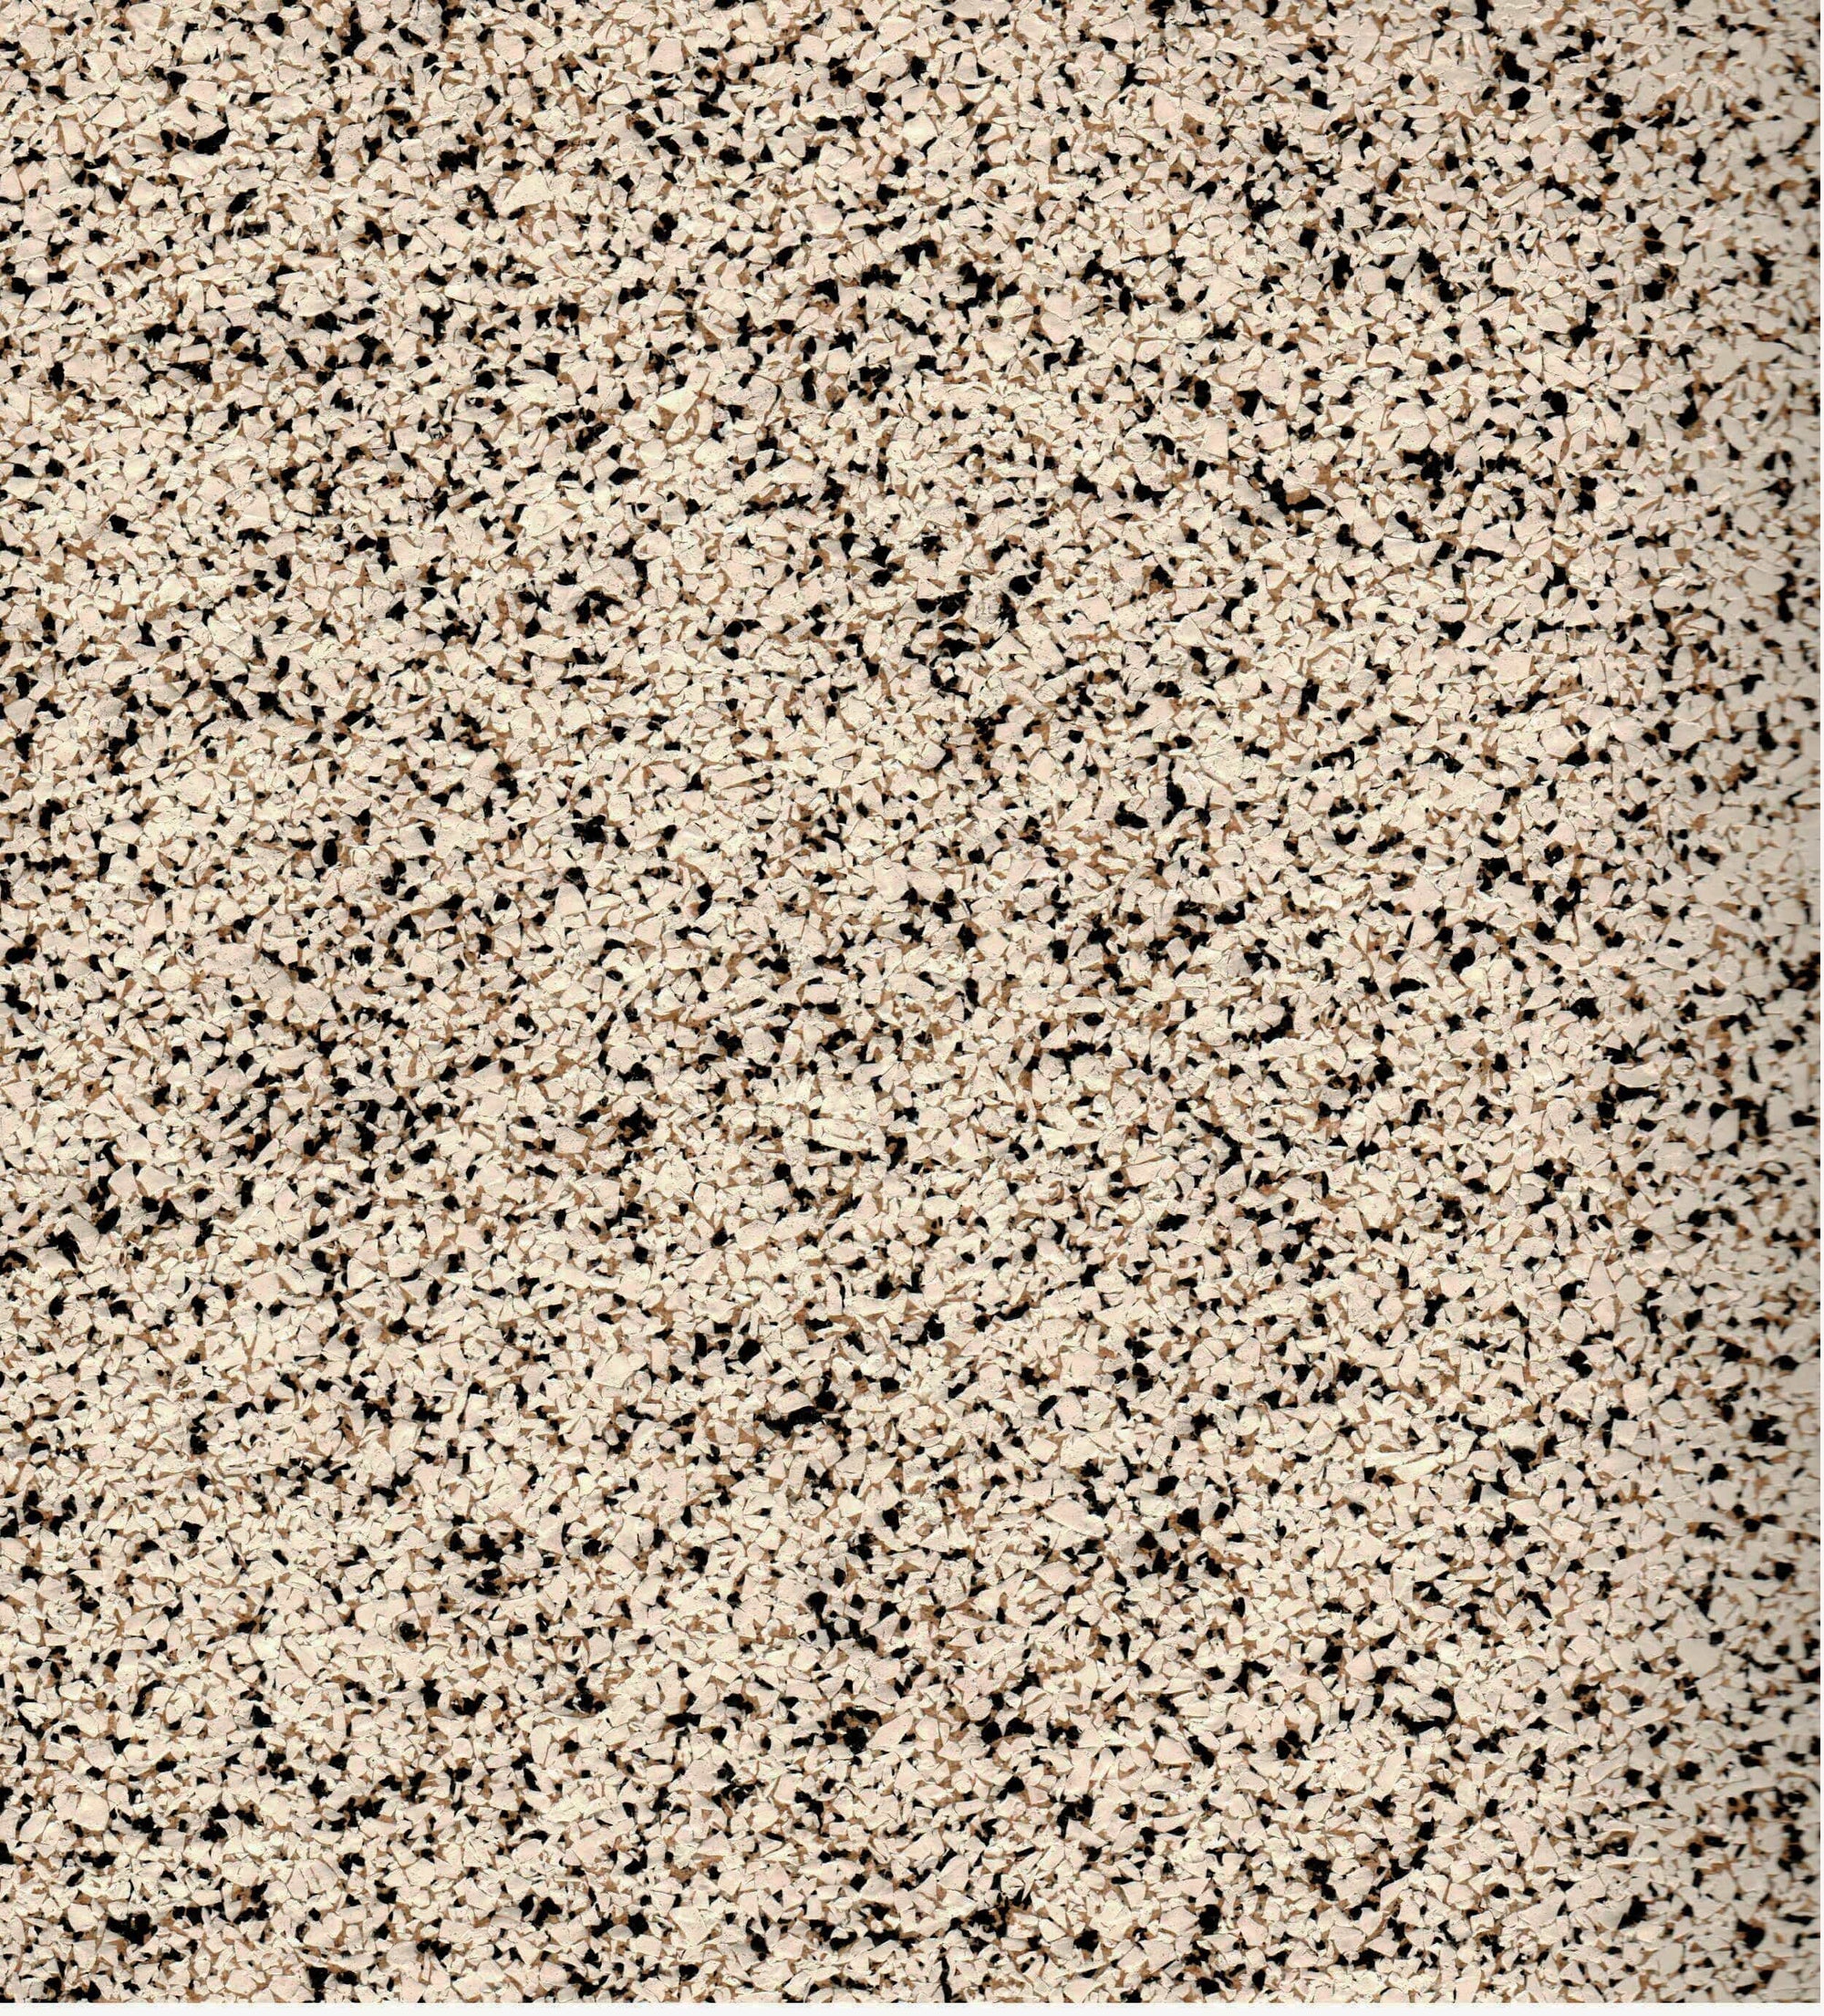 CorkHouse Alpine Recycled Rubber & Cork Floor Mat - Various Patterns